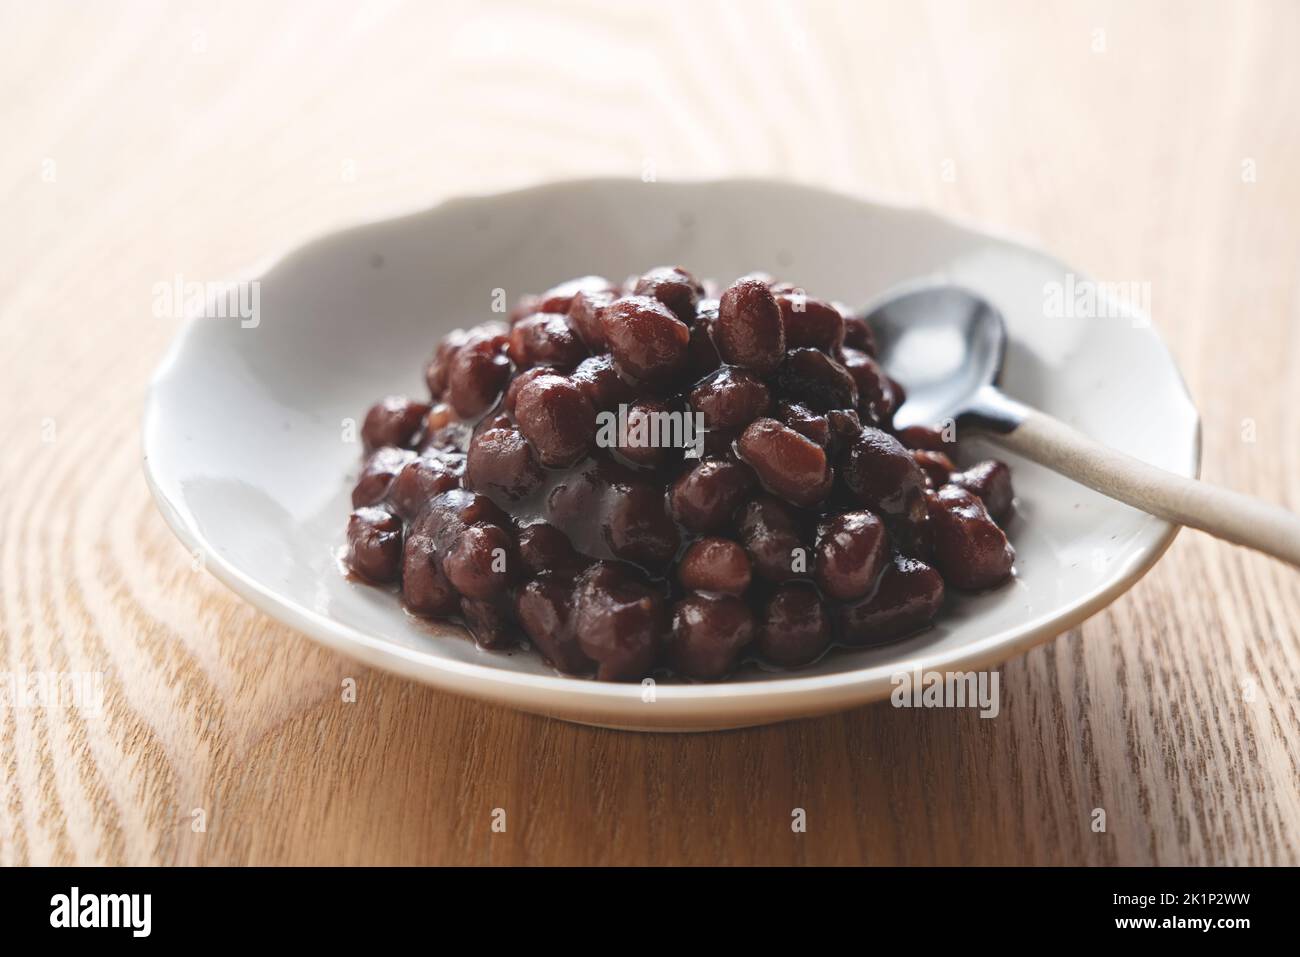 Boiled azuki beans in a dish placed on a wooden background. Stock Photo